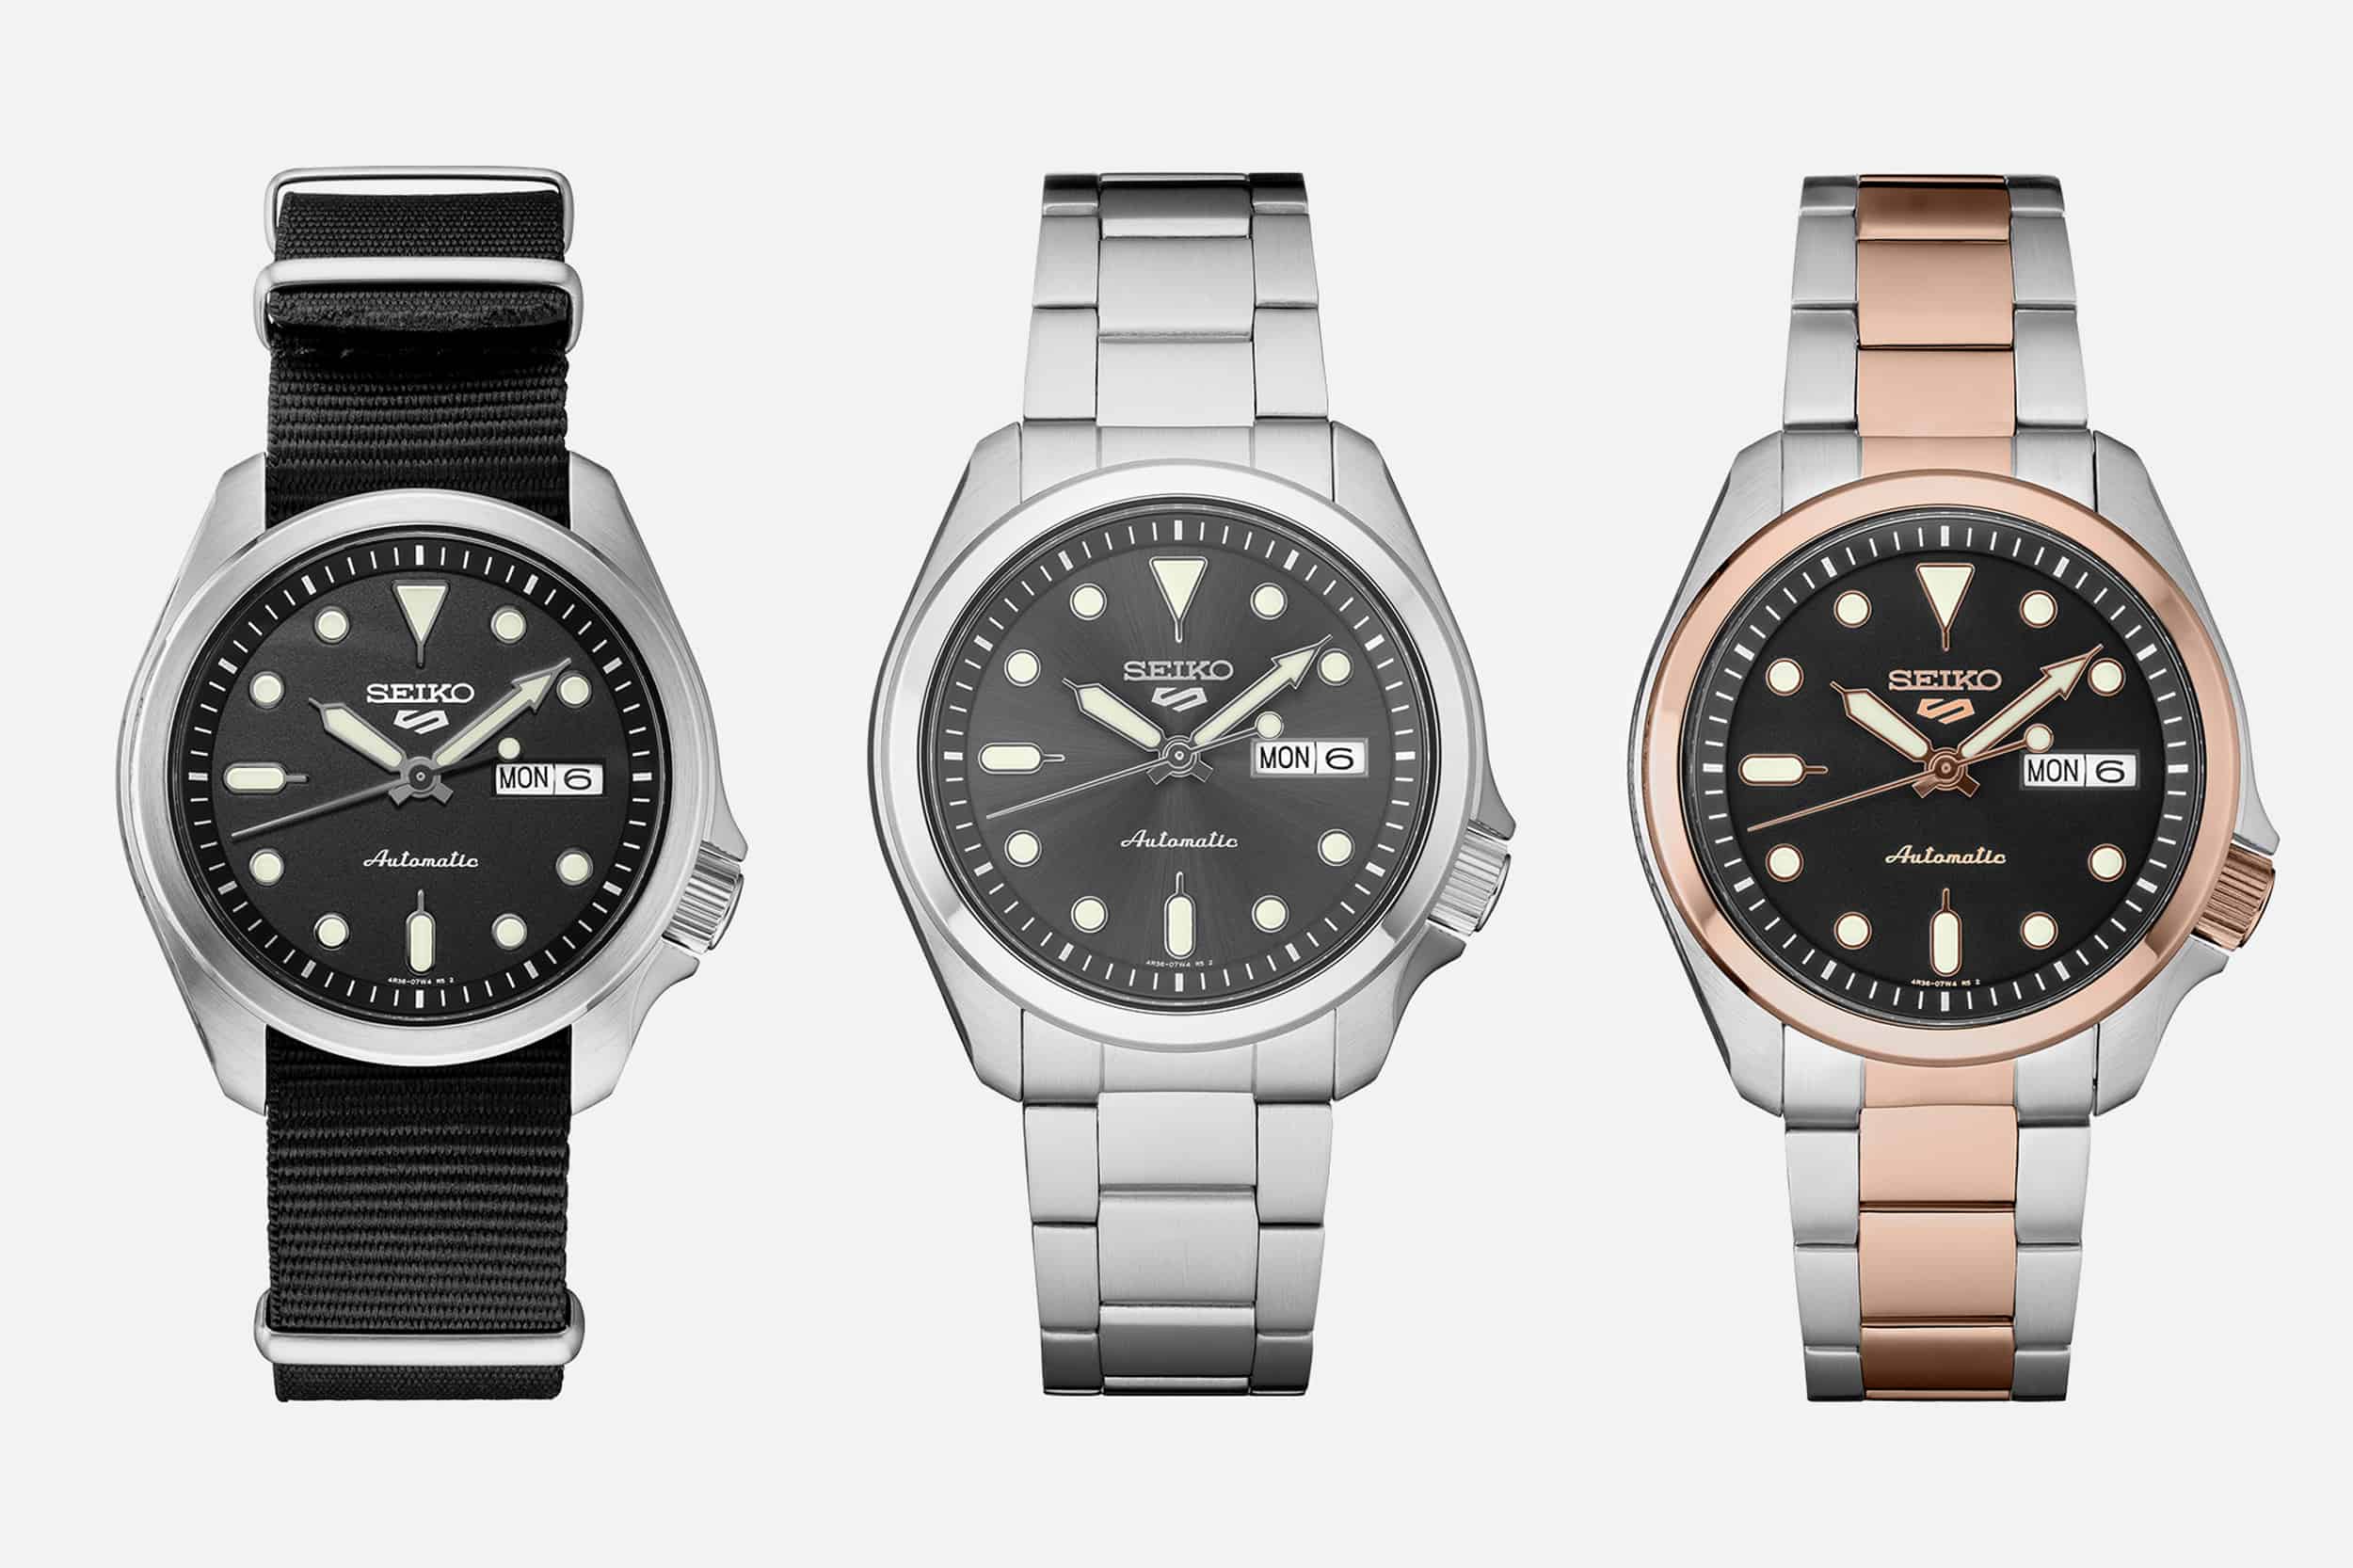 New Watches in the Seiko 5 Sports Collection Lose the Dive Bezel with Their  Latest Update - Worn & Wound